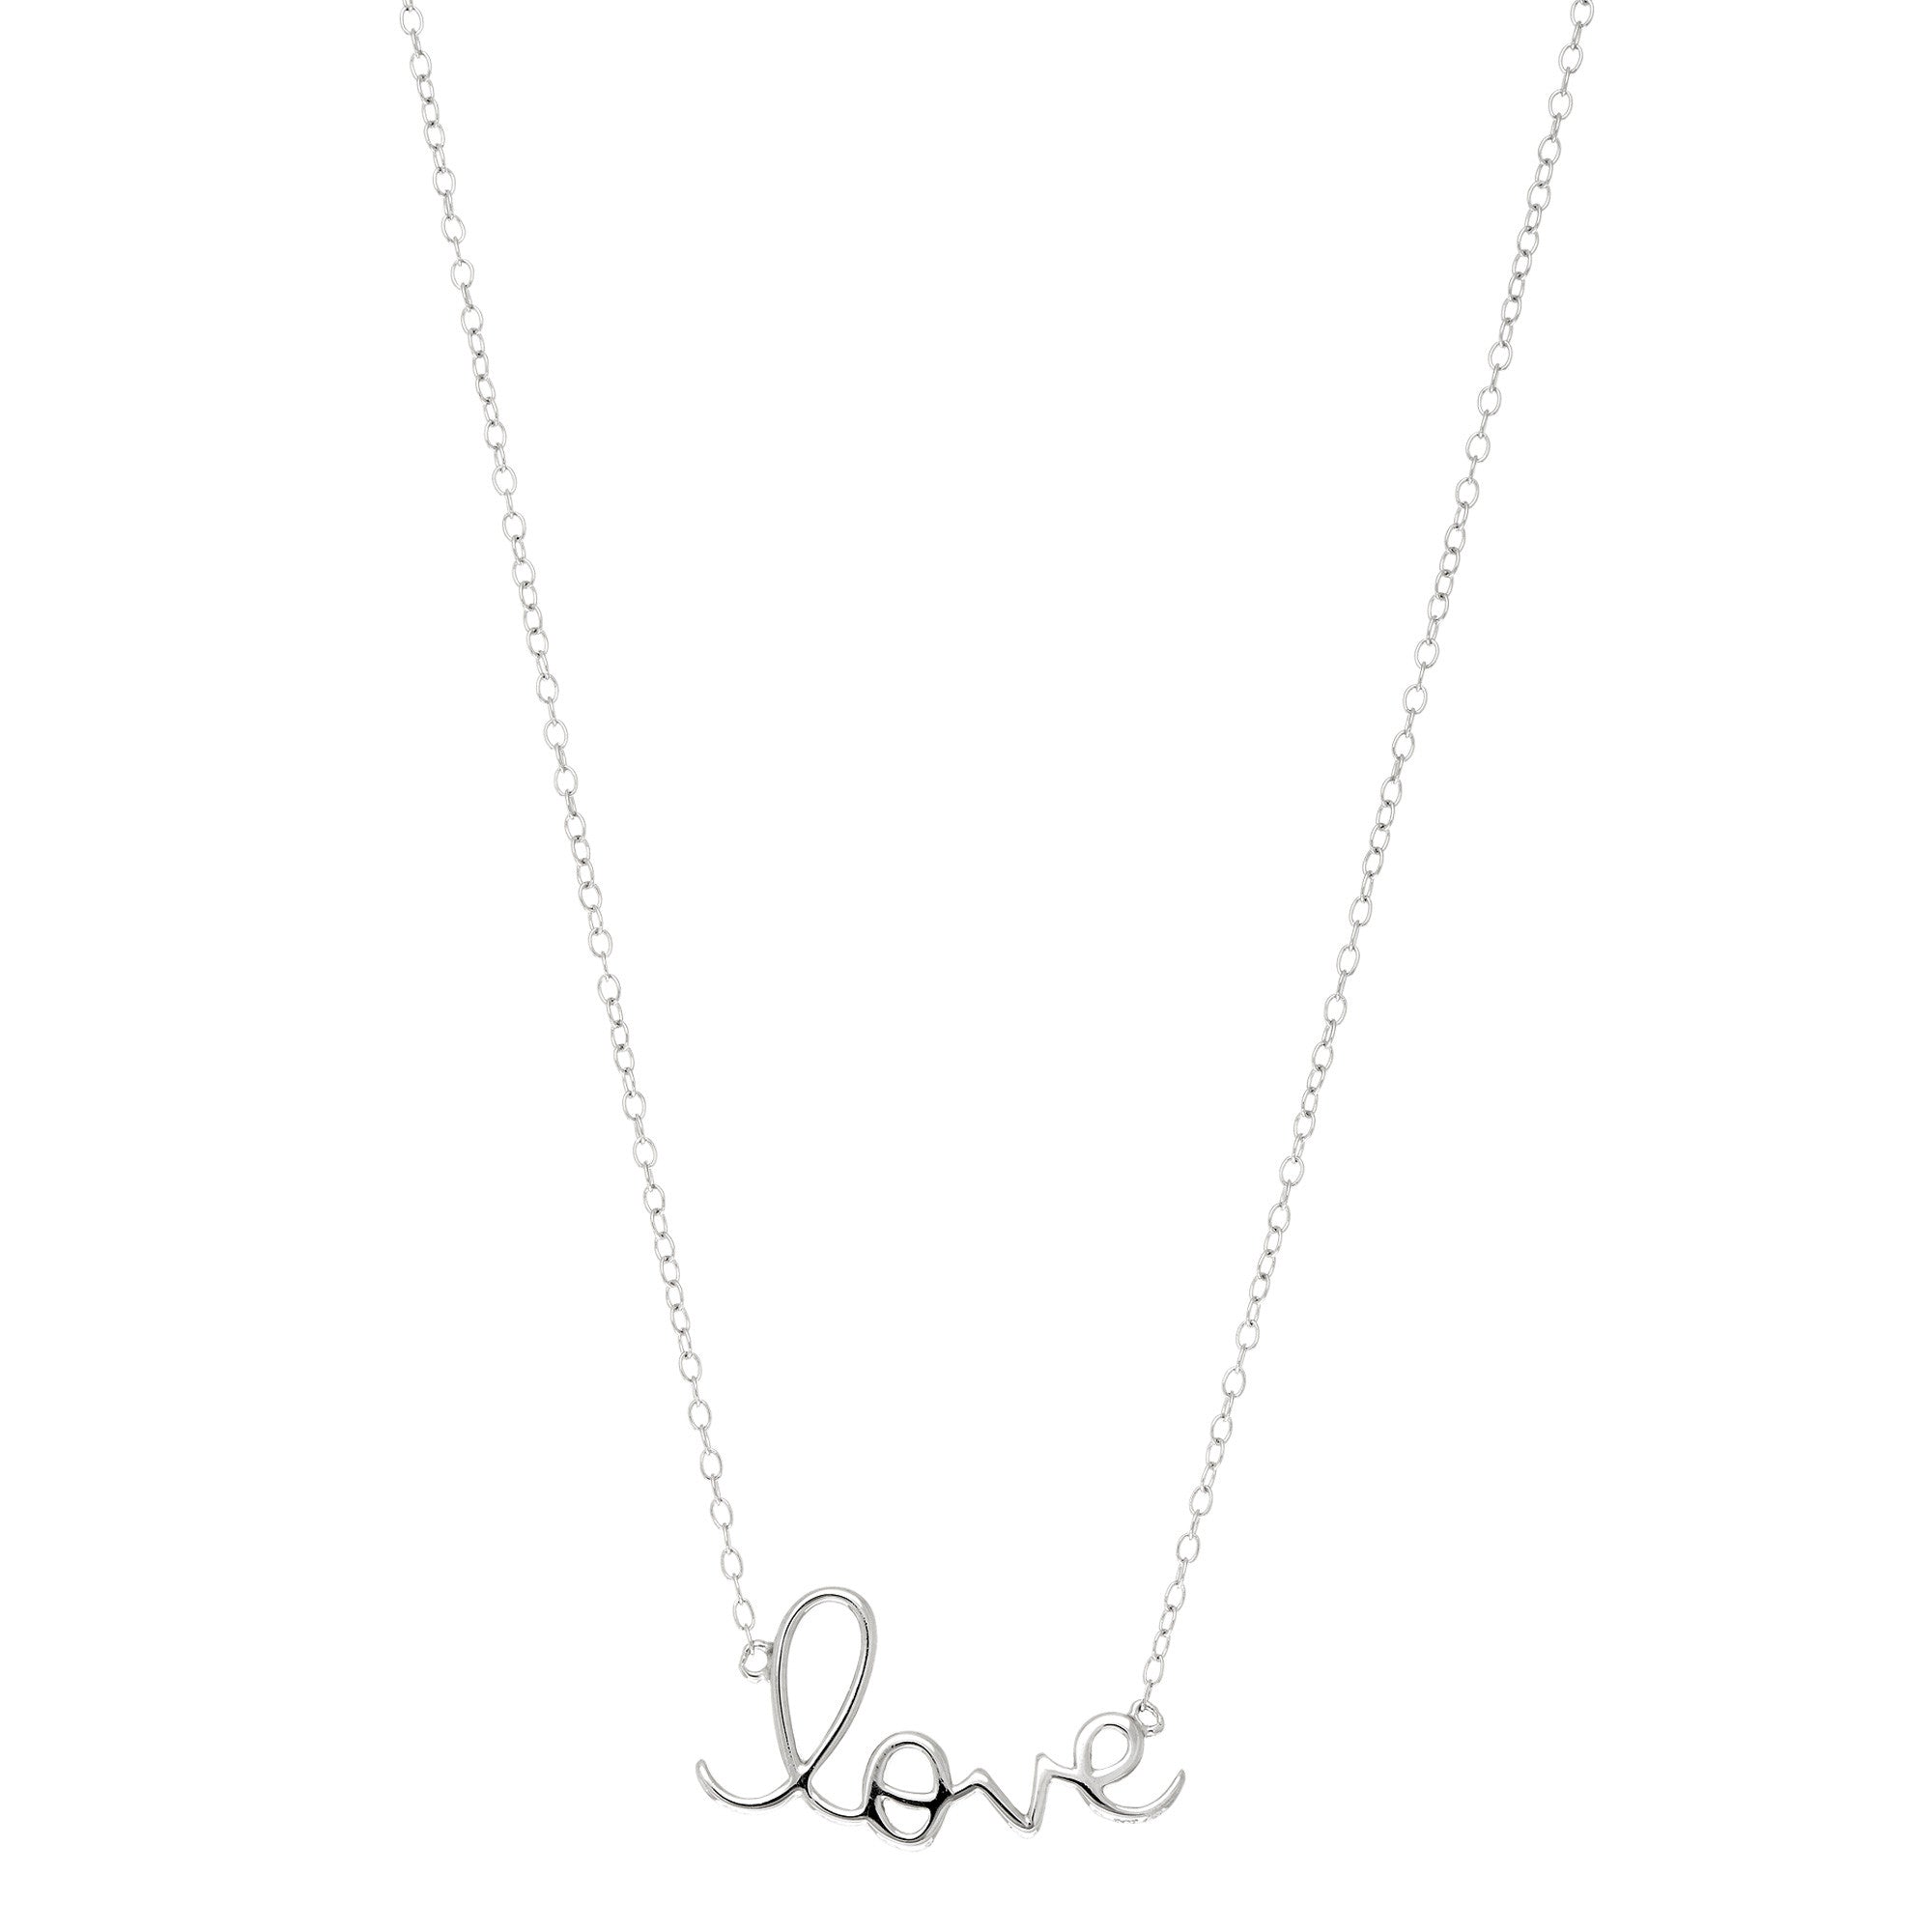 Script Love Logo Necklace In Rhodium Plated Sterling Silver - 18 Inches fine designer jewelry for men and women